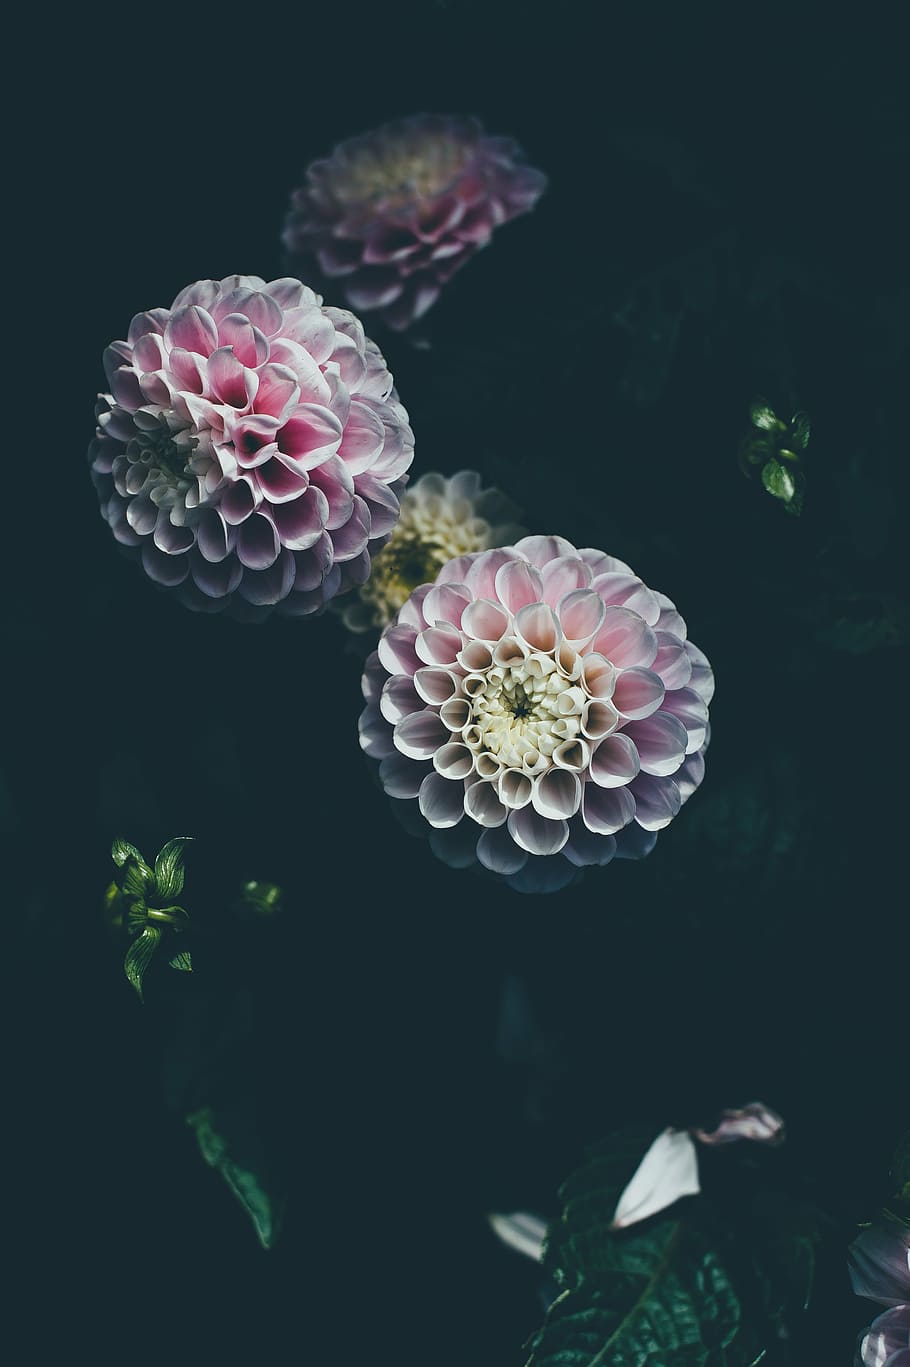 pink-and-white petaled flowers, pink, yellow, flowers, dark, room, dahlia, flower, petals, plant